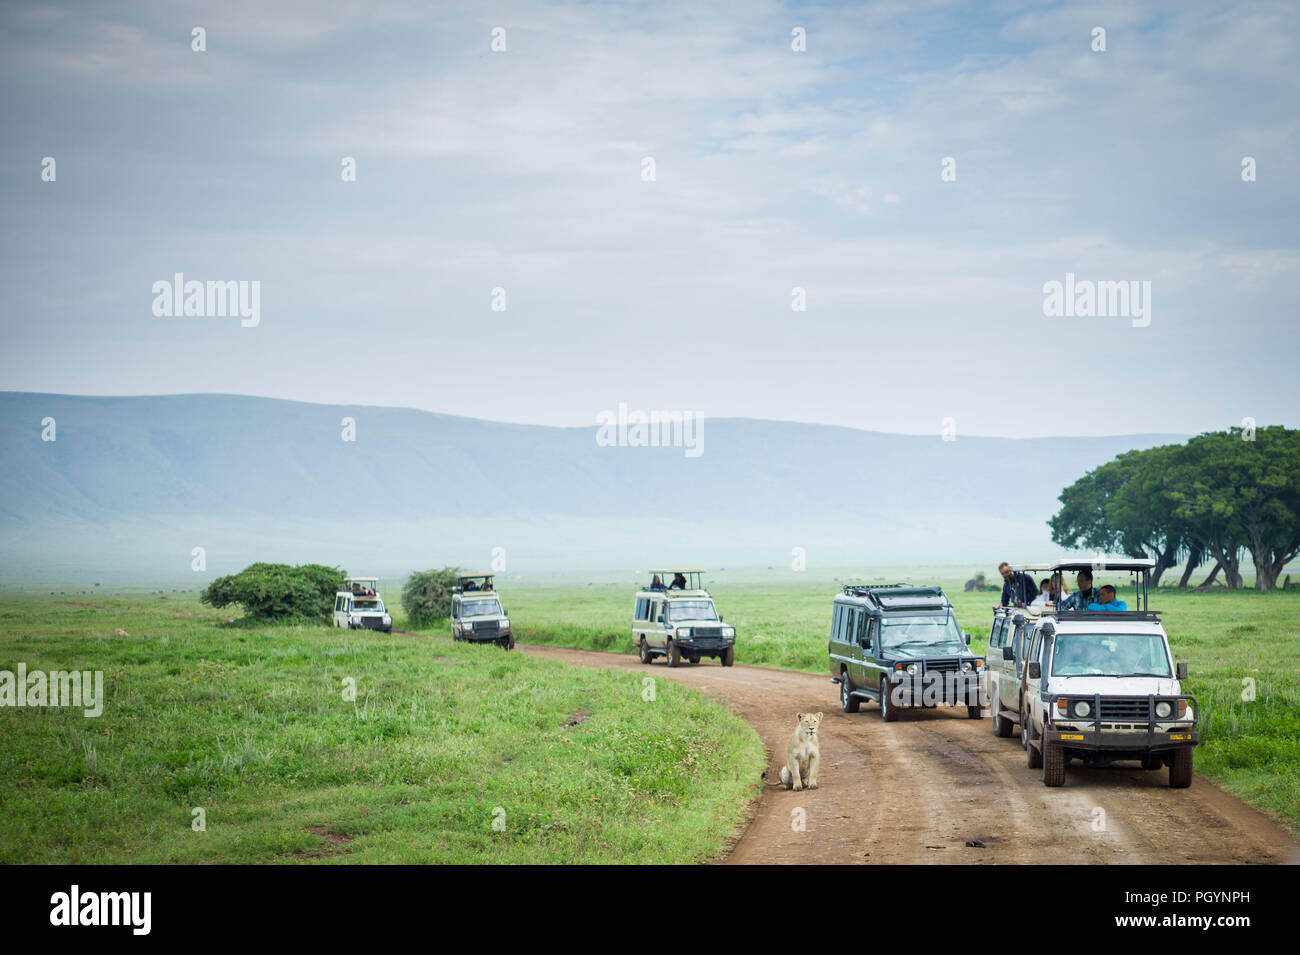 Game drive vehicles line up to view a lioness, Panthera leo, Ngorongoro Crater, Ngorongoro Crater Conservation Area, Arusha Region, Tanzania. Stock Photo